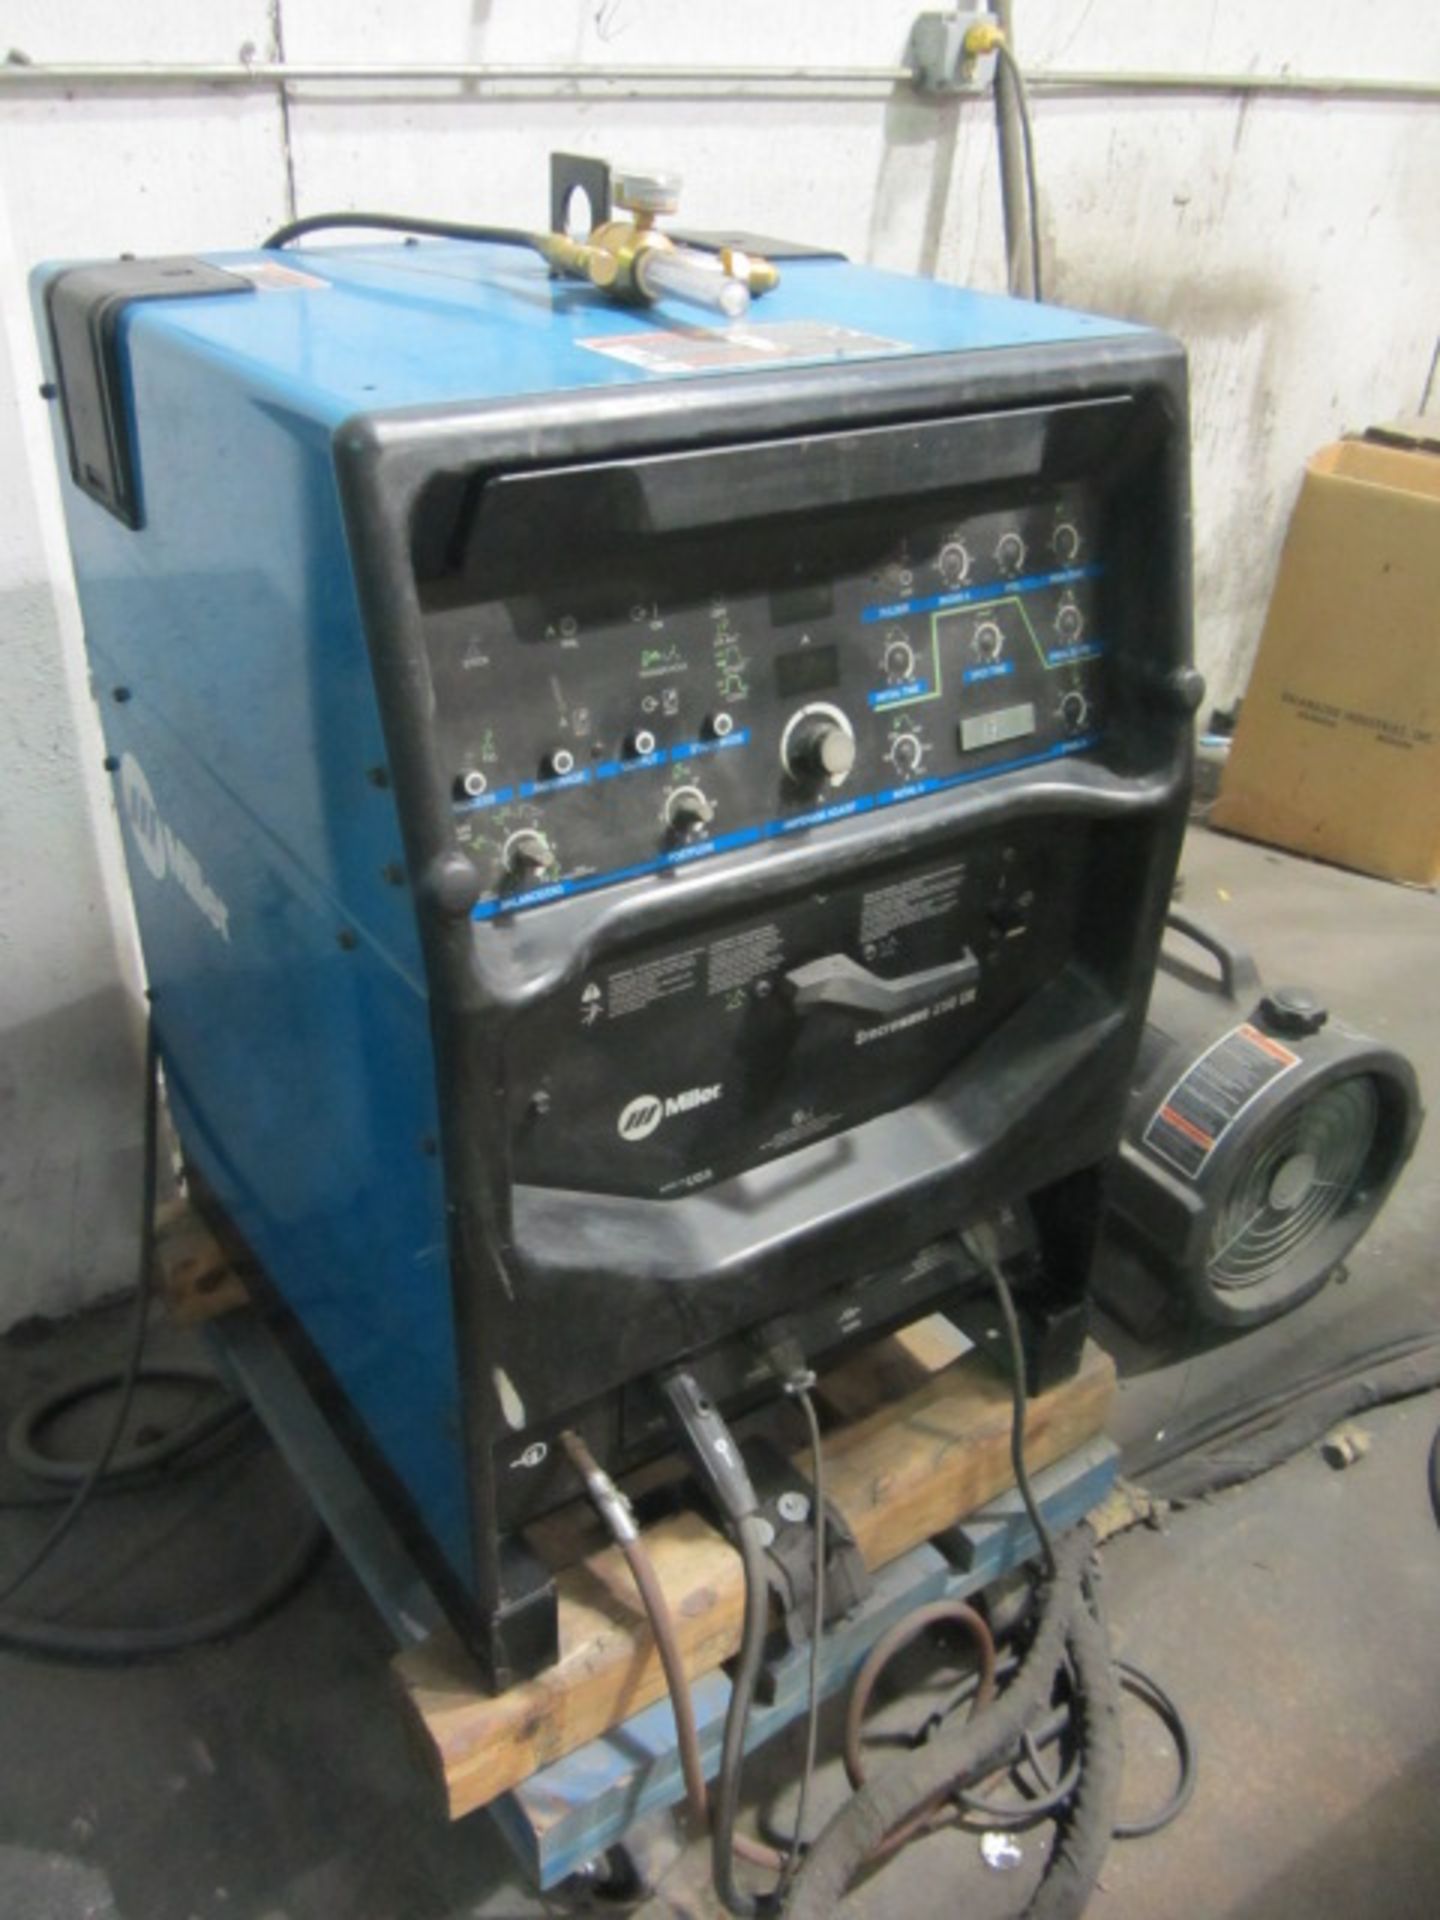 Pandjiris Model 120E9-36 10' Horizontal Seam Welder with Miller Variable Speed Control, Remote - Image 4 of 7